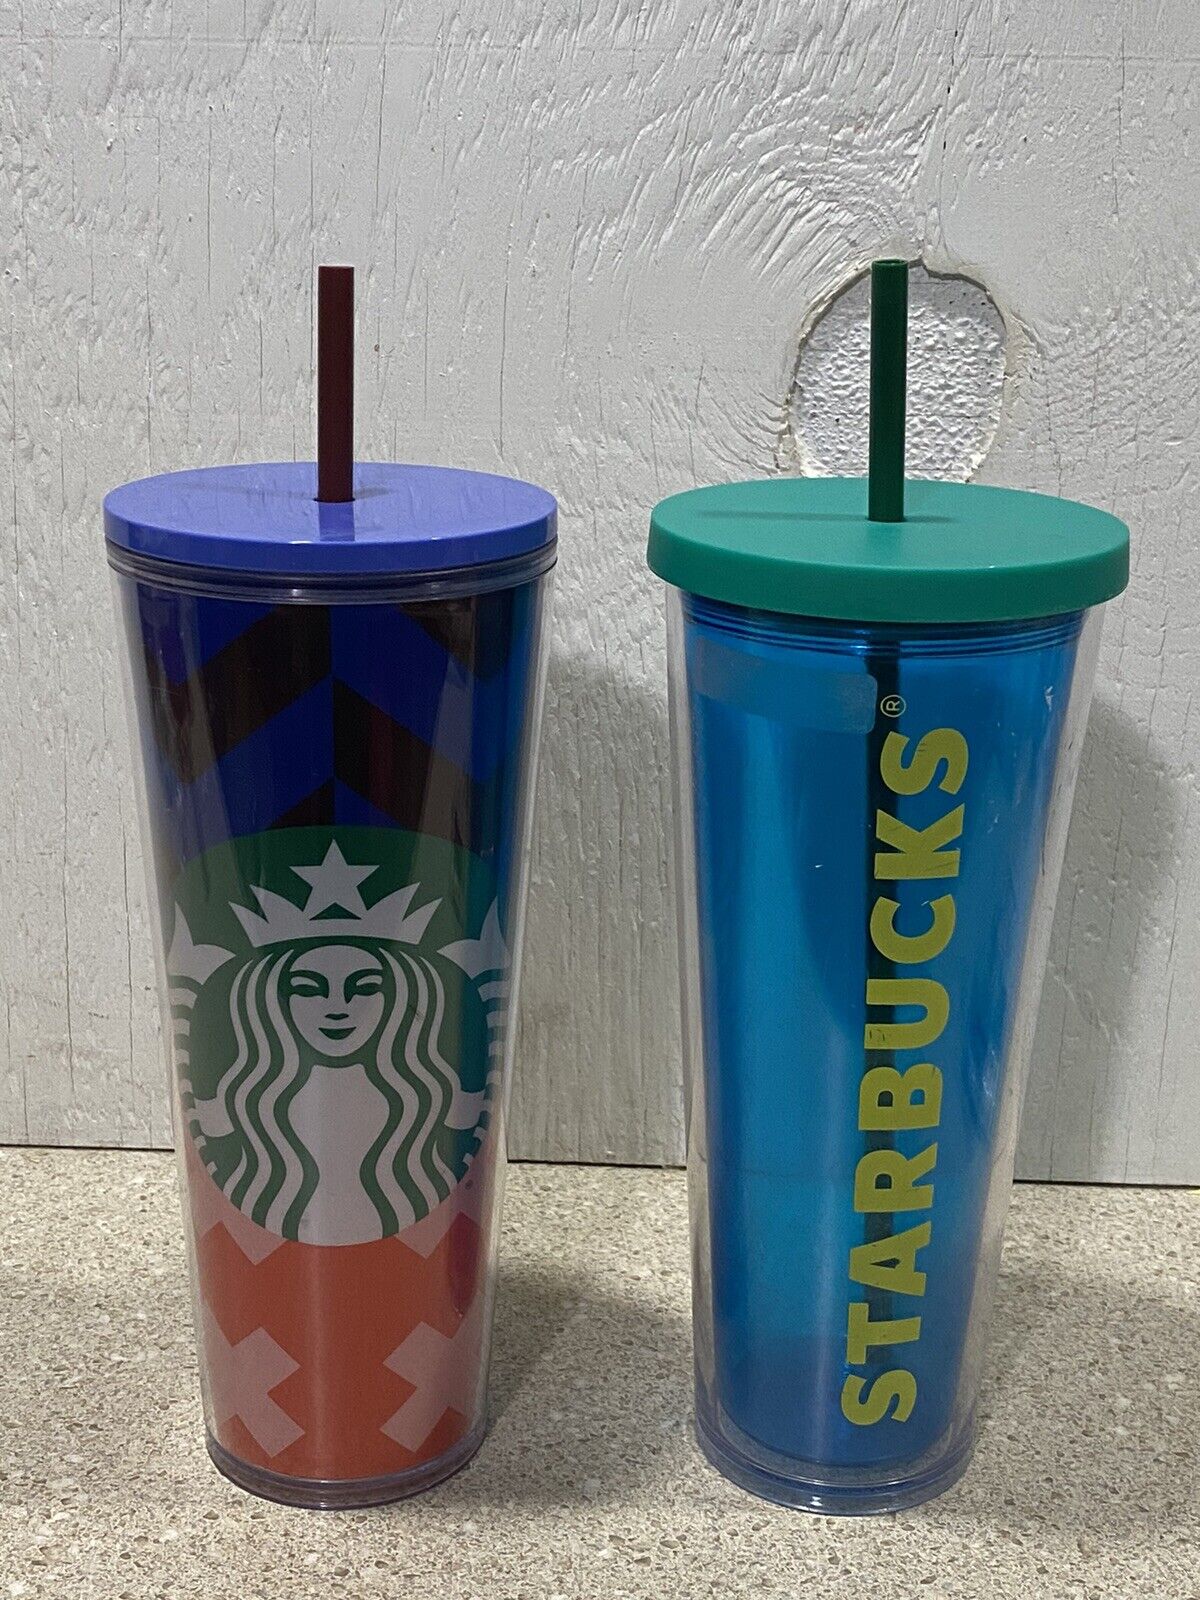 2 Starbucks Venti Cold Cup Tumblers - 2014 & 2021 - Awesome Find